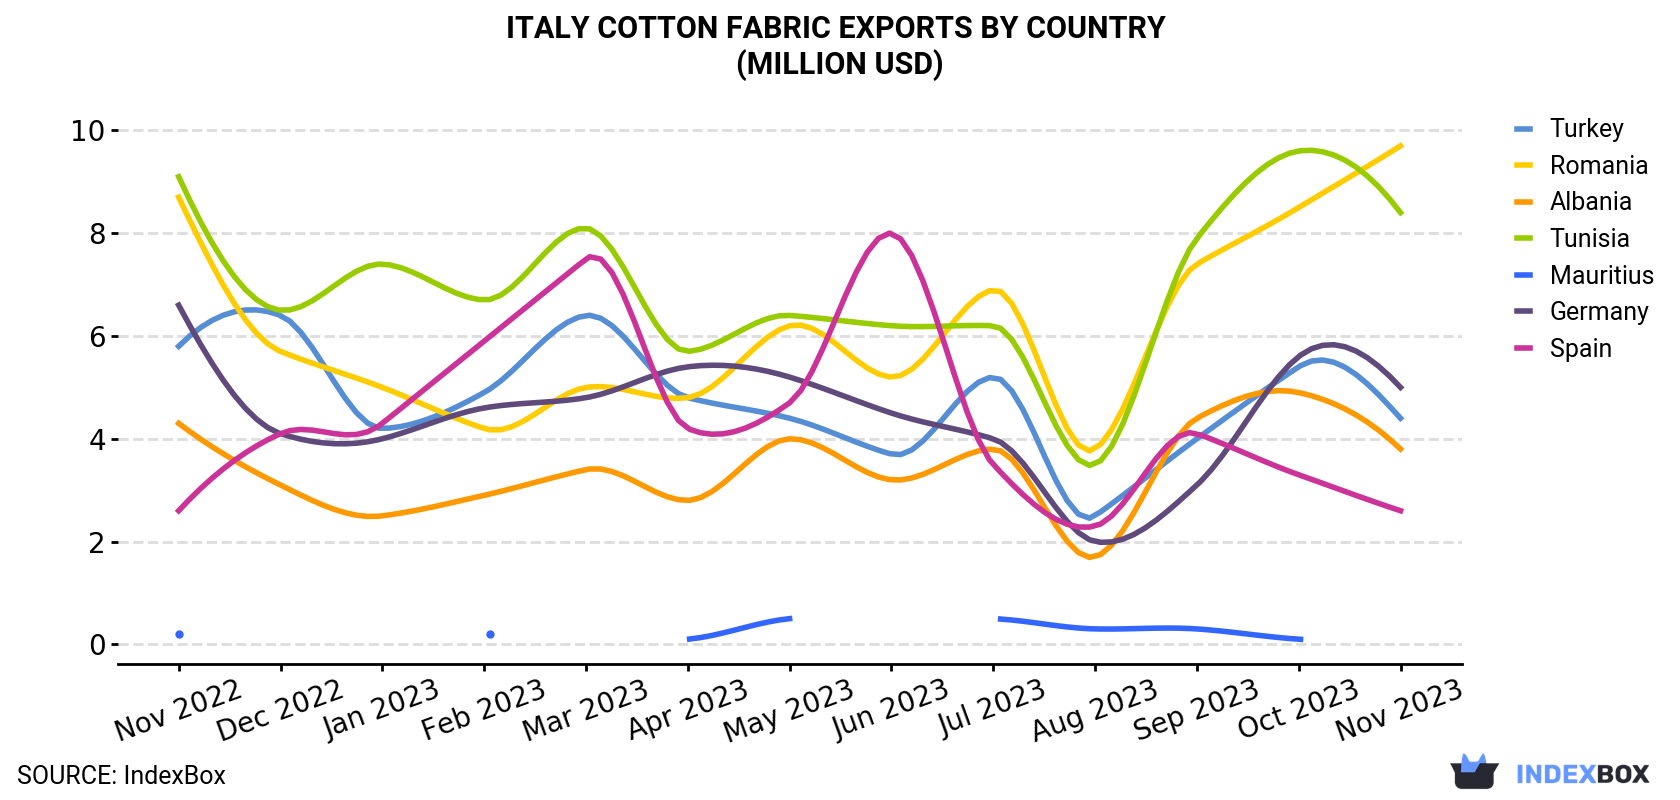 Italy Cotton Fabric Exports By Country (Million USD)